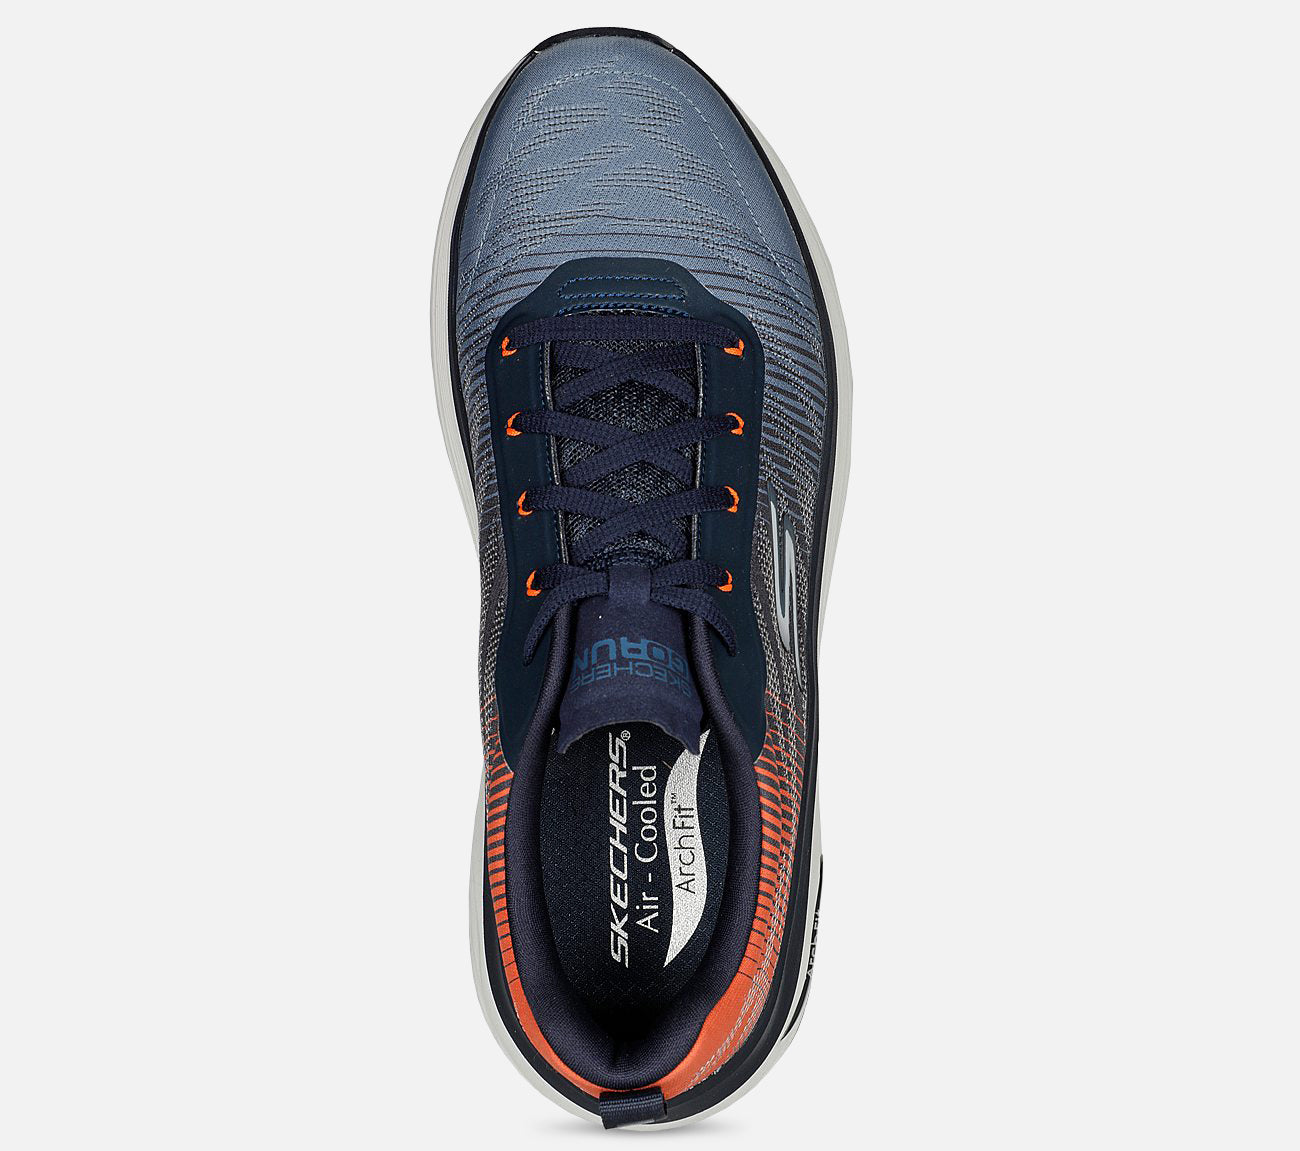 Max Cushioning Arch Fit - Come Back Shoe Skechers